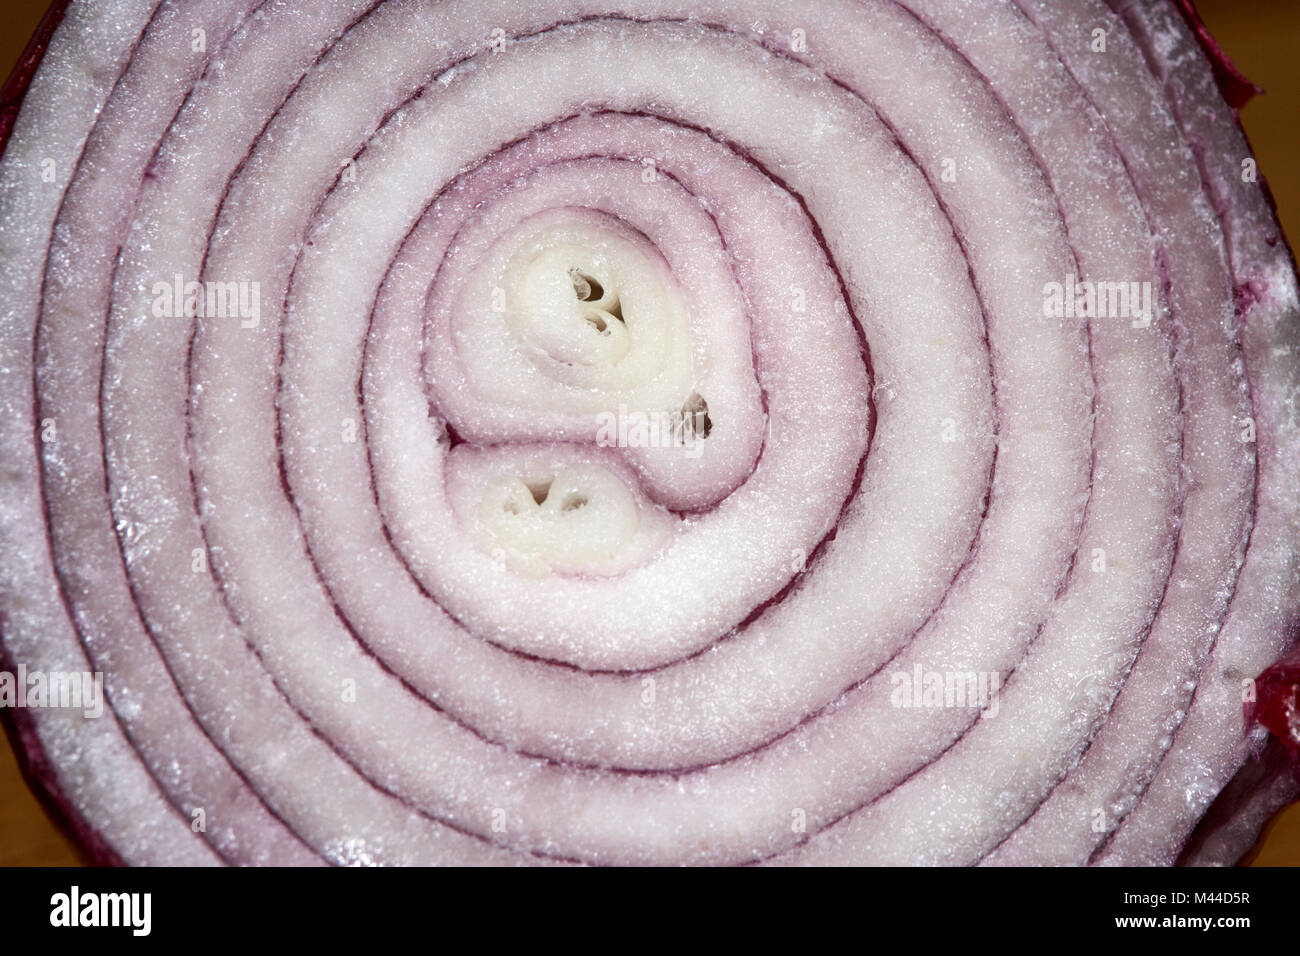 cross section of a red onion Stock Photo